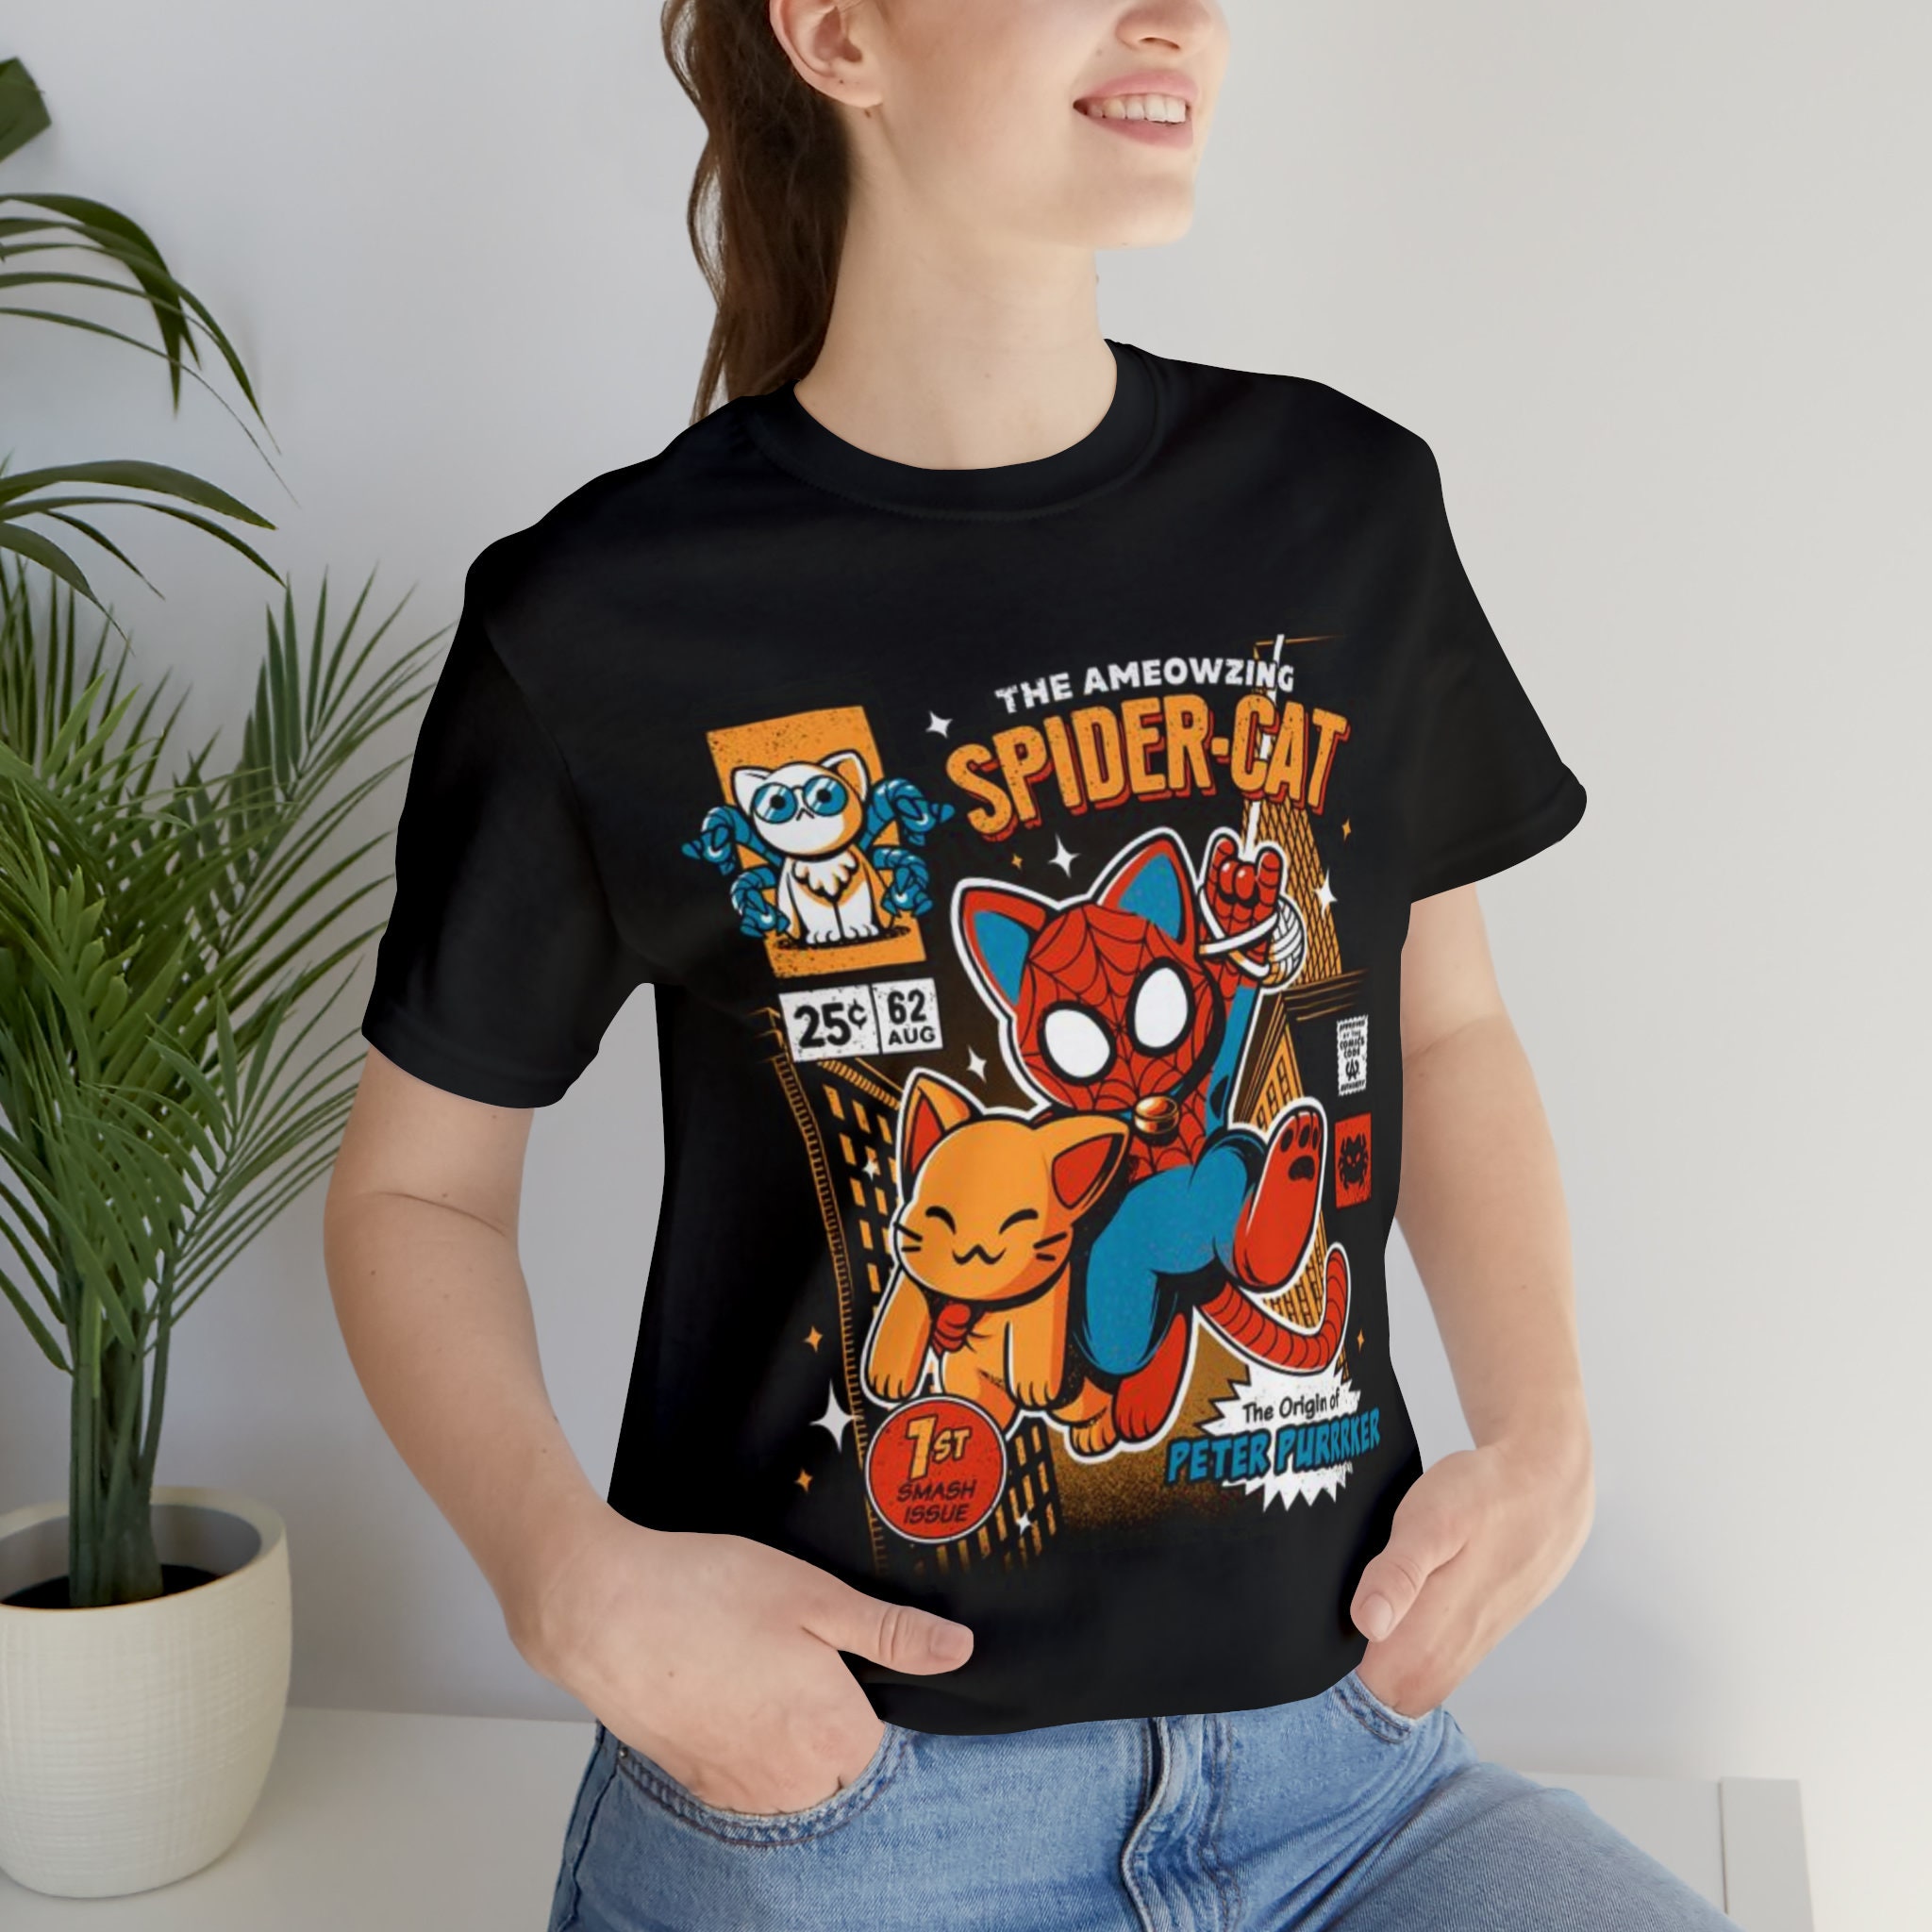 Discover Spider Cat Graphic T-Shirt, Marvel Spiderman Graphic Tee, Marvel Comics Shirt, Spiderman Tee, Mcu Fan Gift